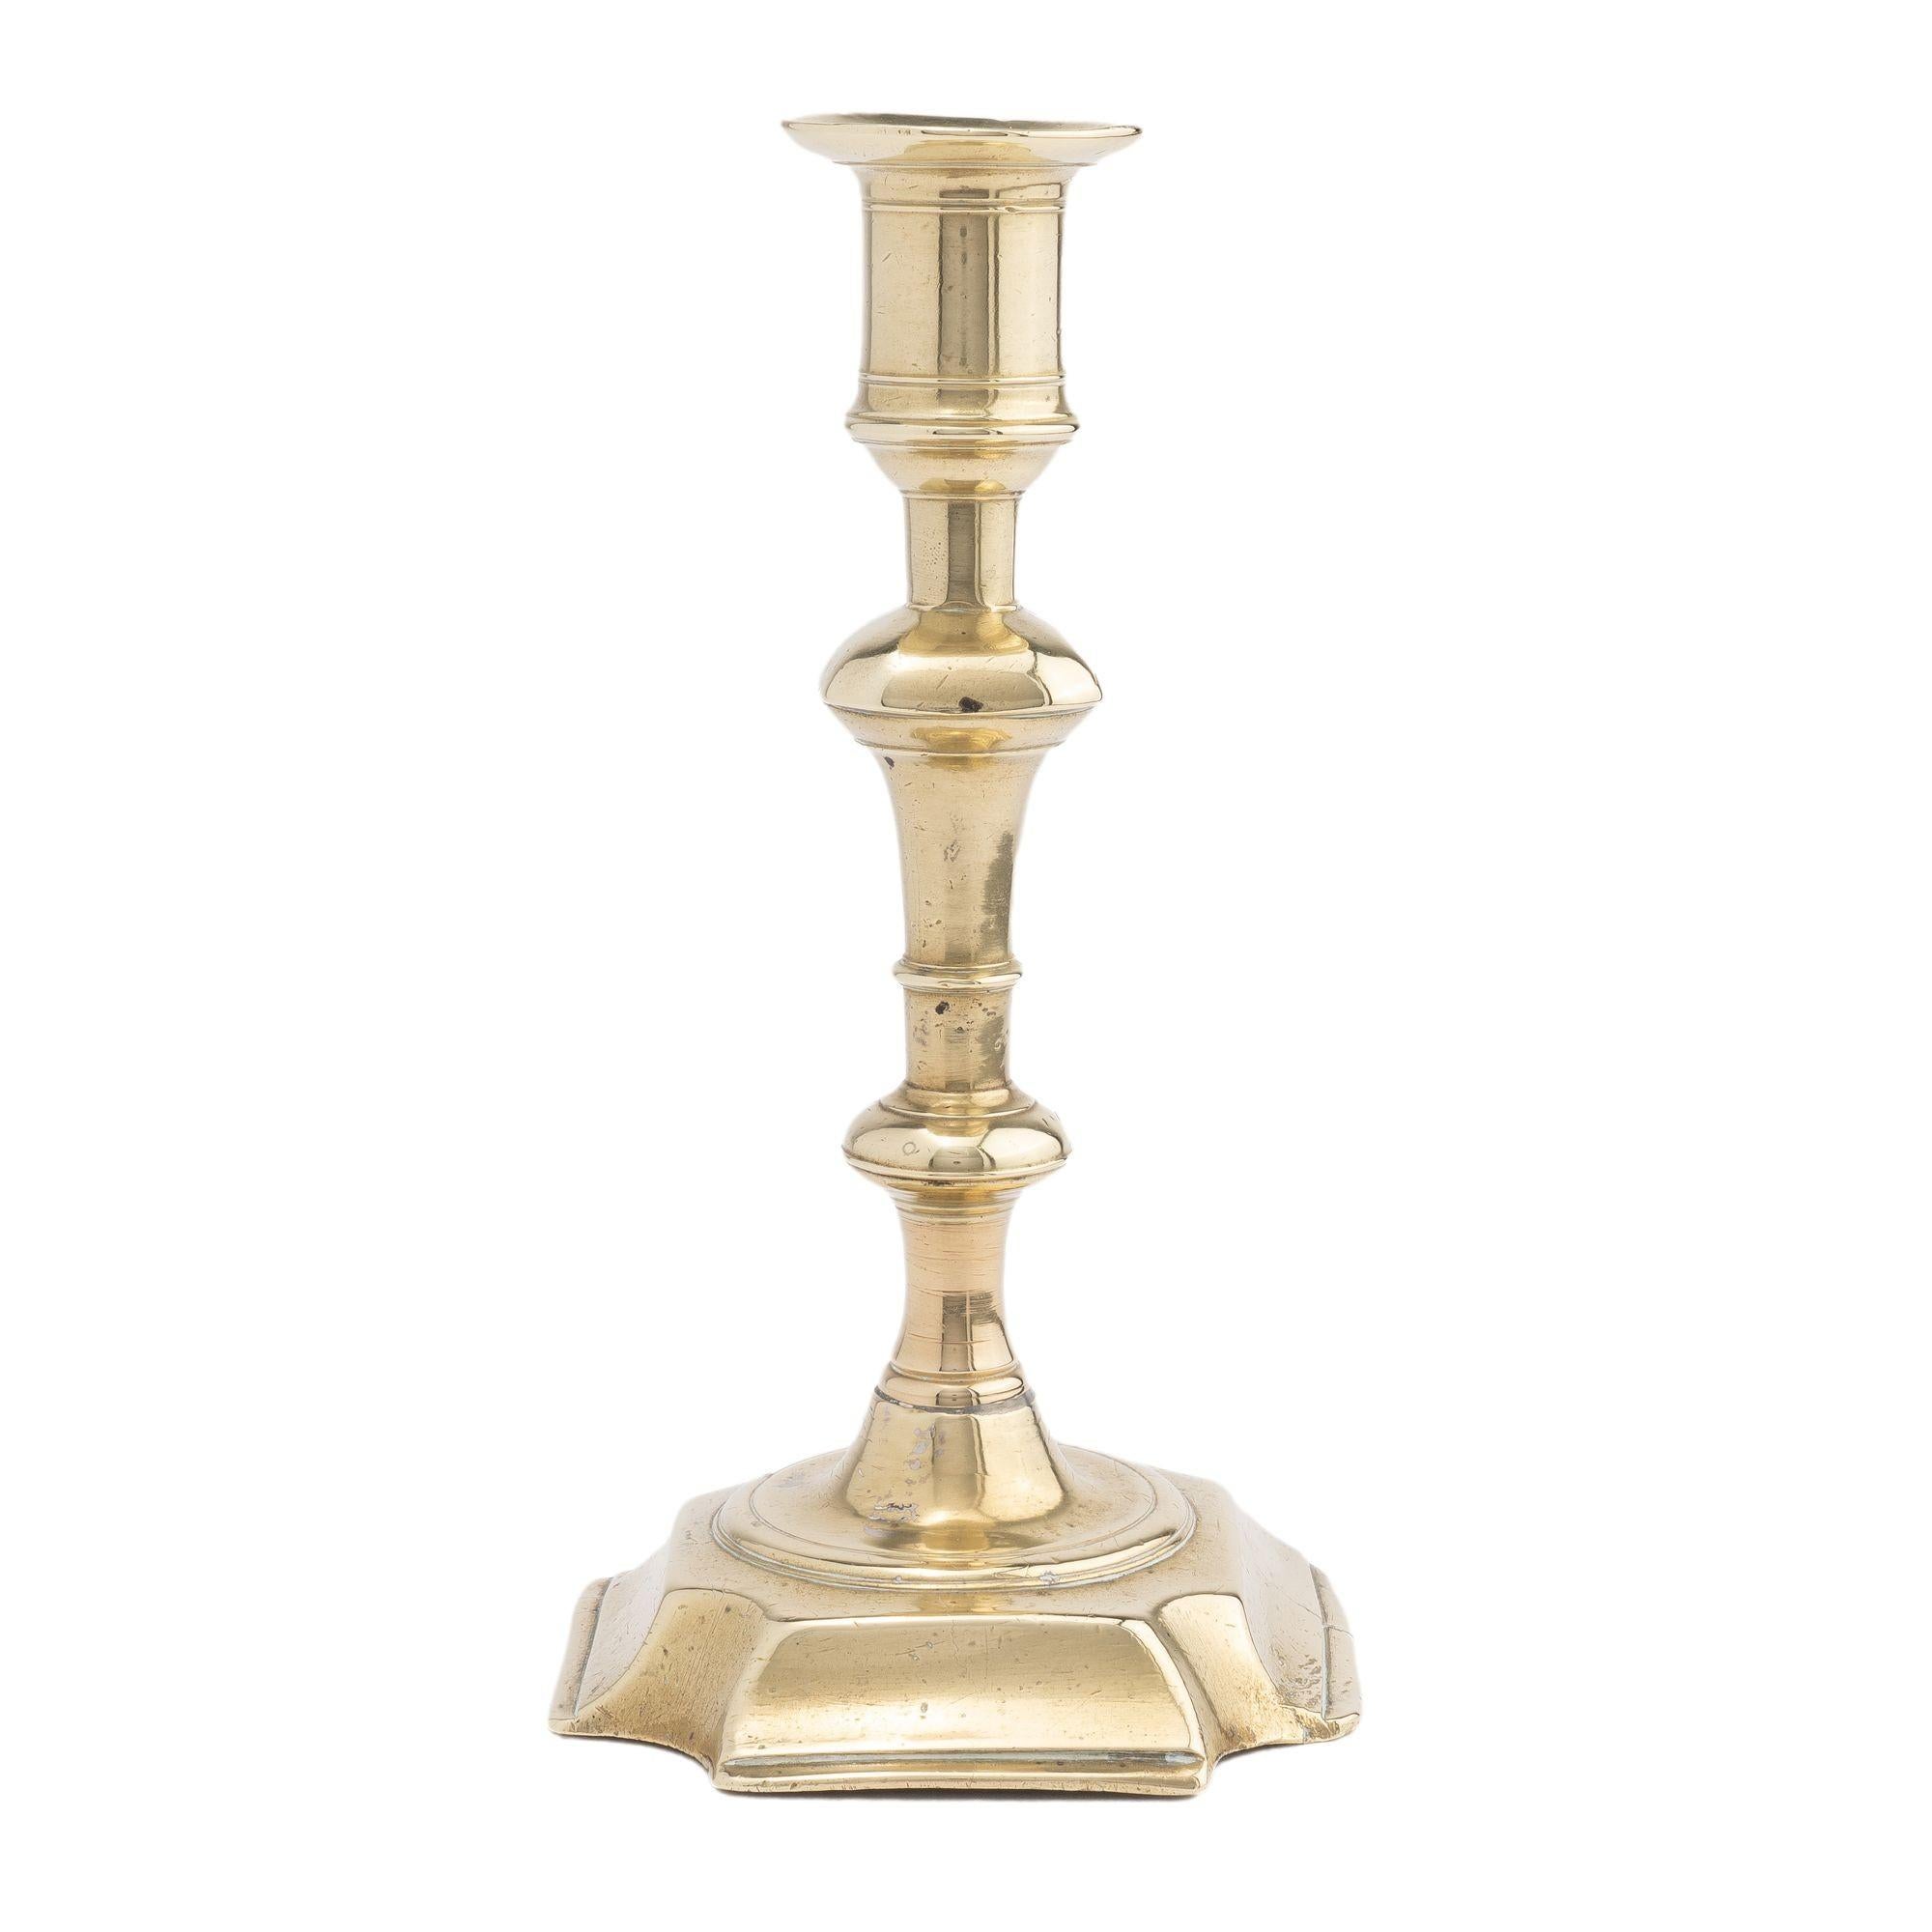 Cast brass Queen Anne candlestick with urn form candle cup with circular bobeshe, supported by a baluster with a four sided knob above ring and knob turnings peened to a raised square base with cove cut corners. The shaft has been cast in two parts